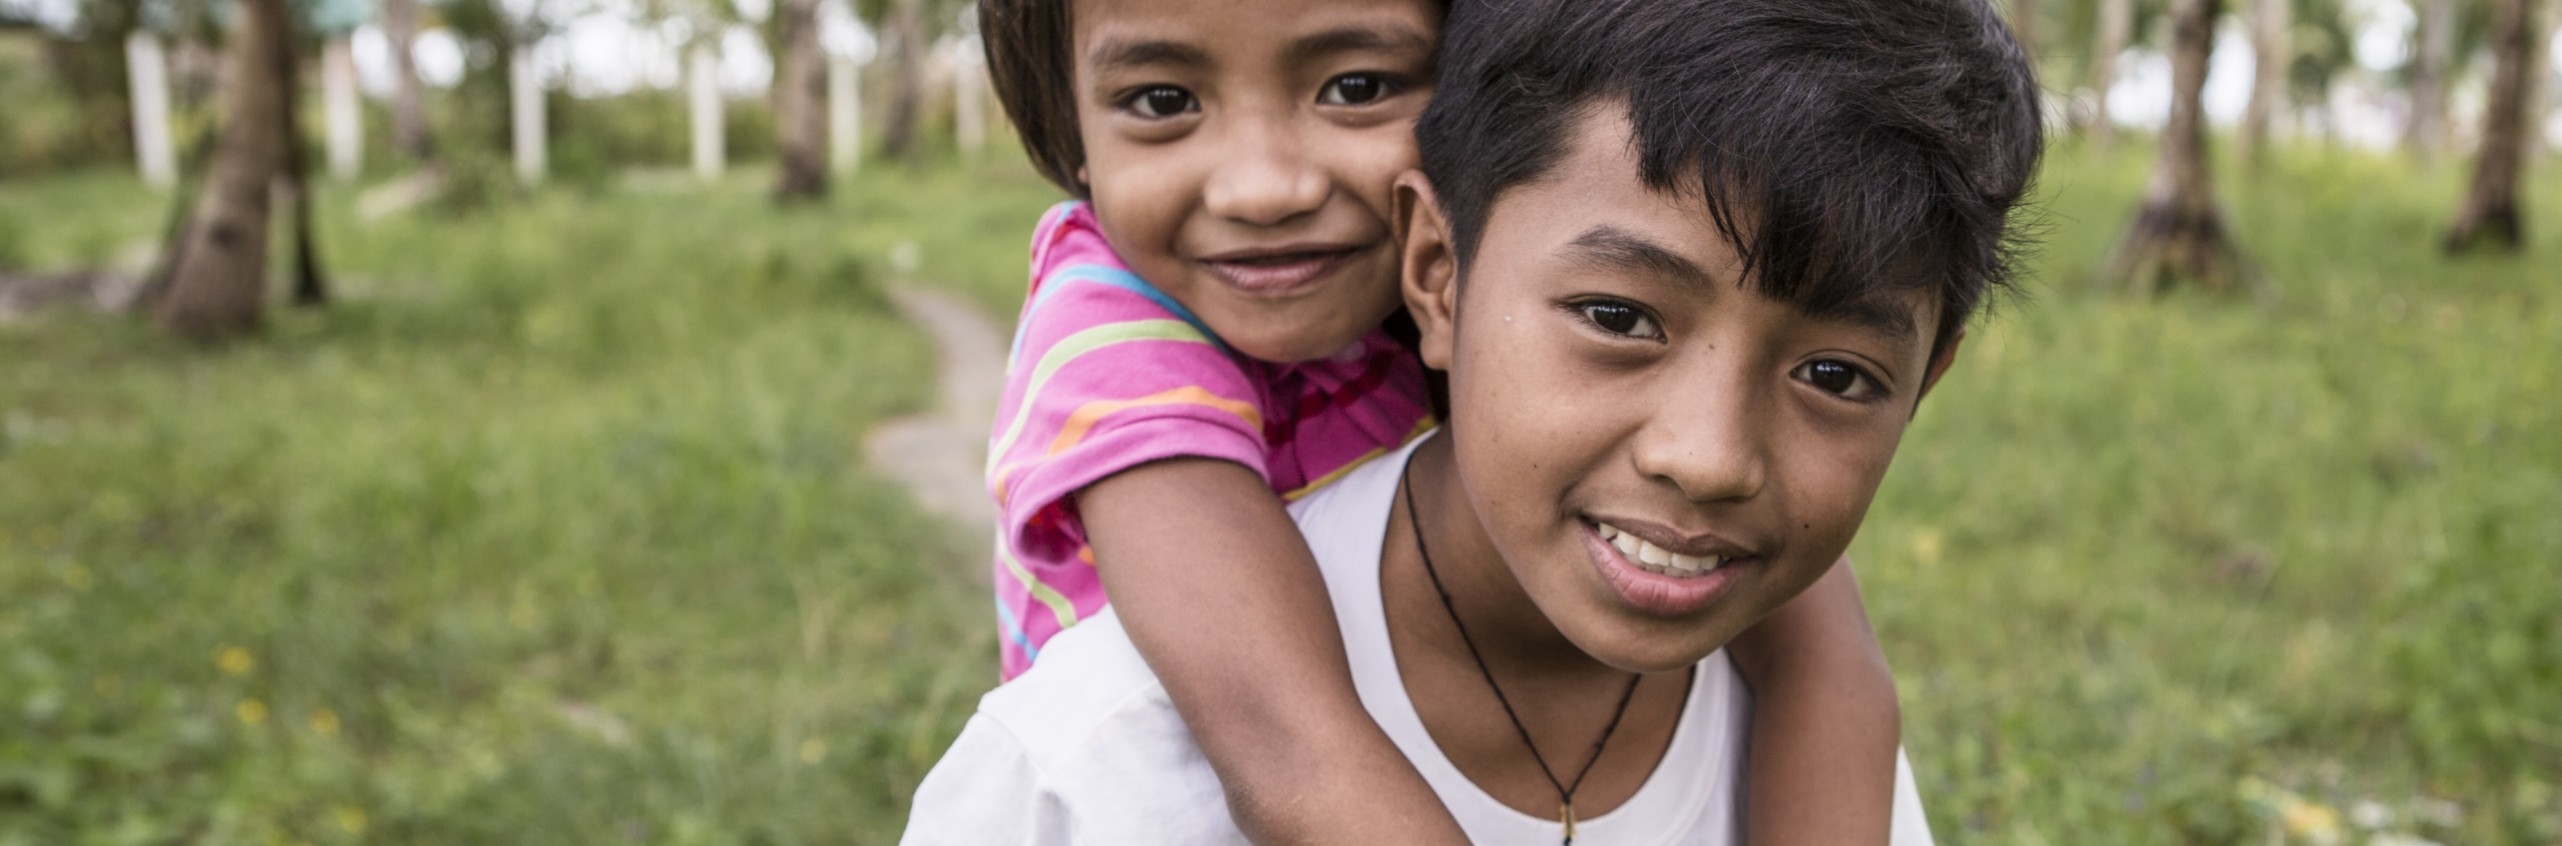 Philippines, a little girl in a pink shirt smiling, is on the back of a little boy in a white t-shirt who is also smiling at the camera.